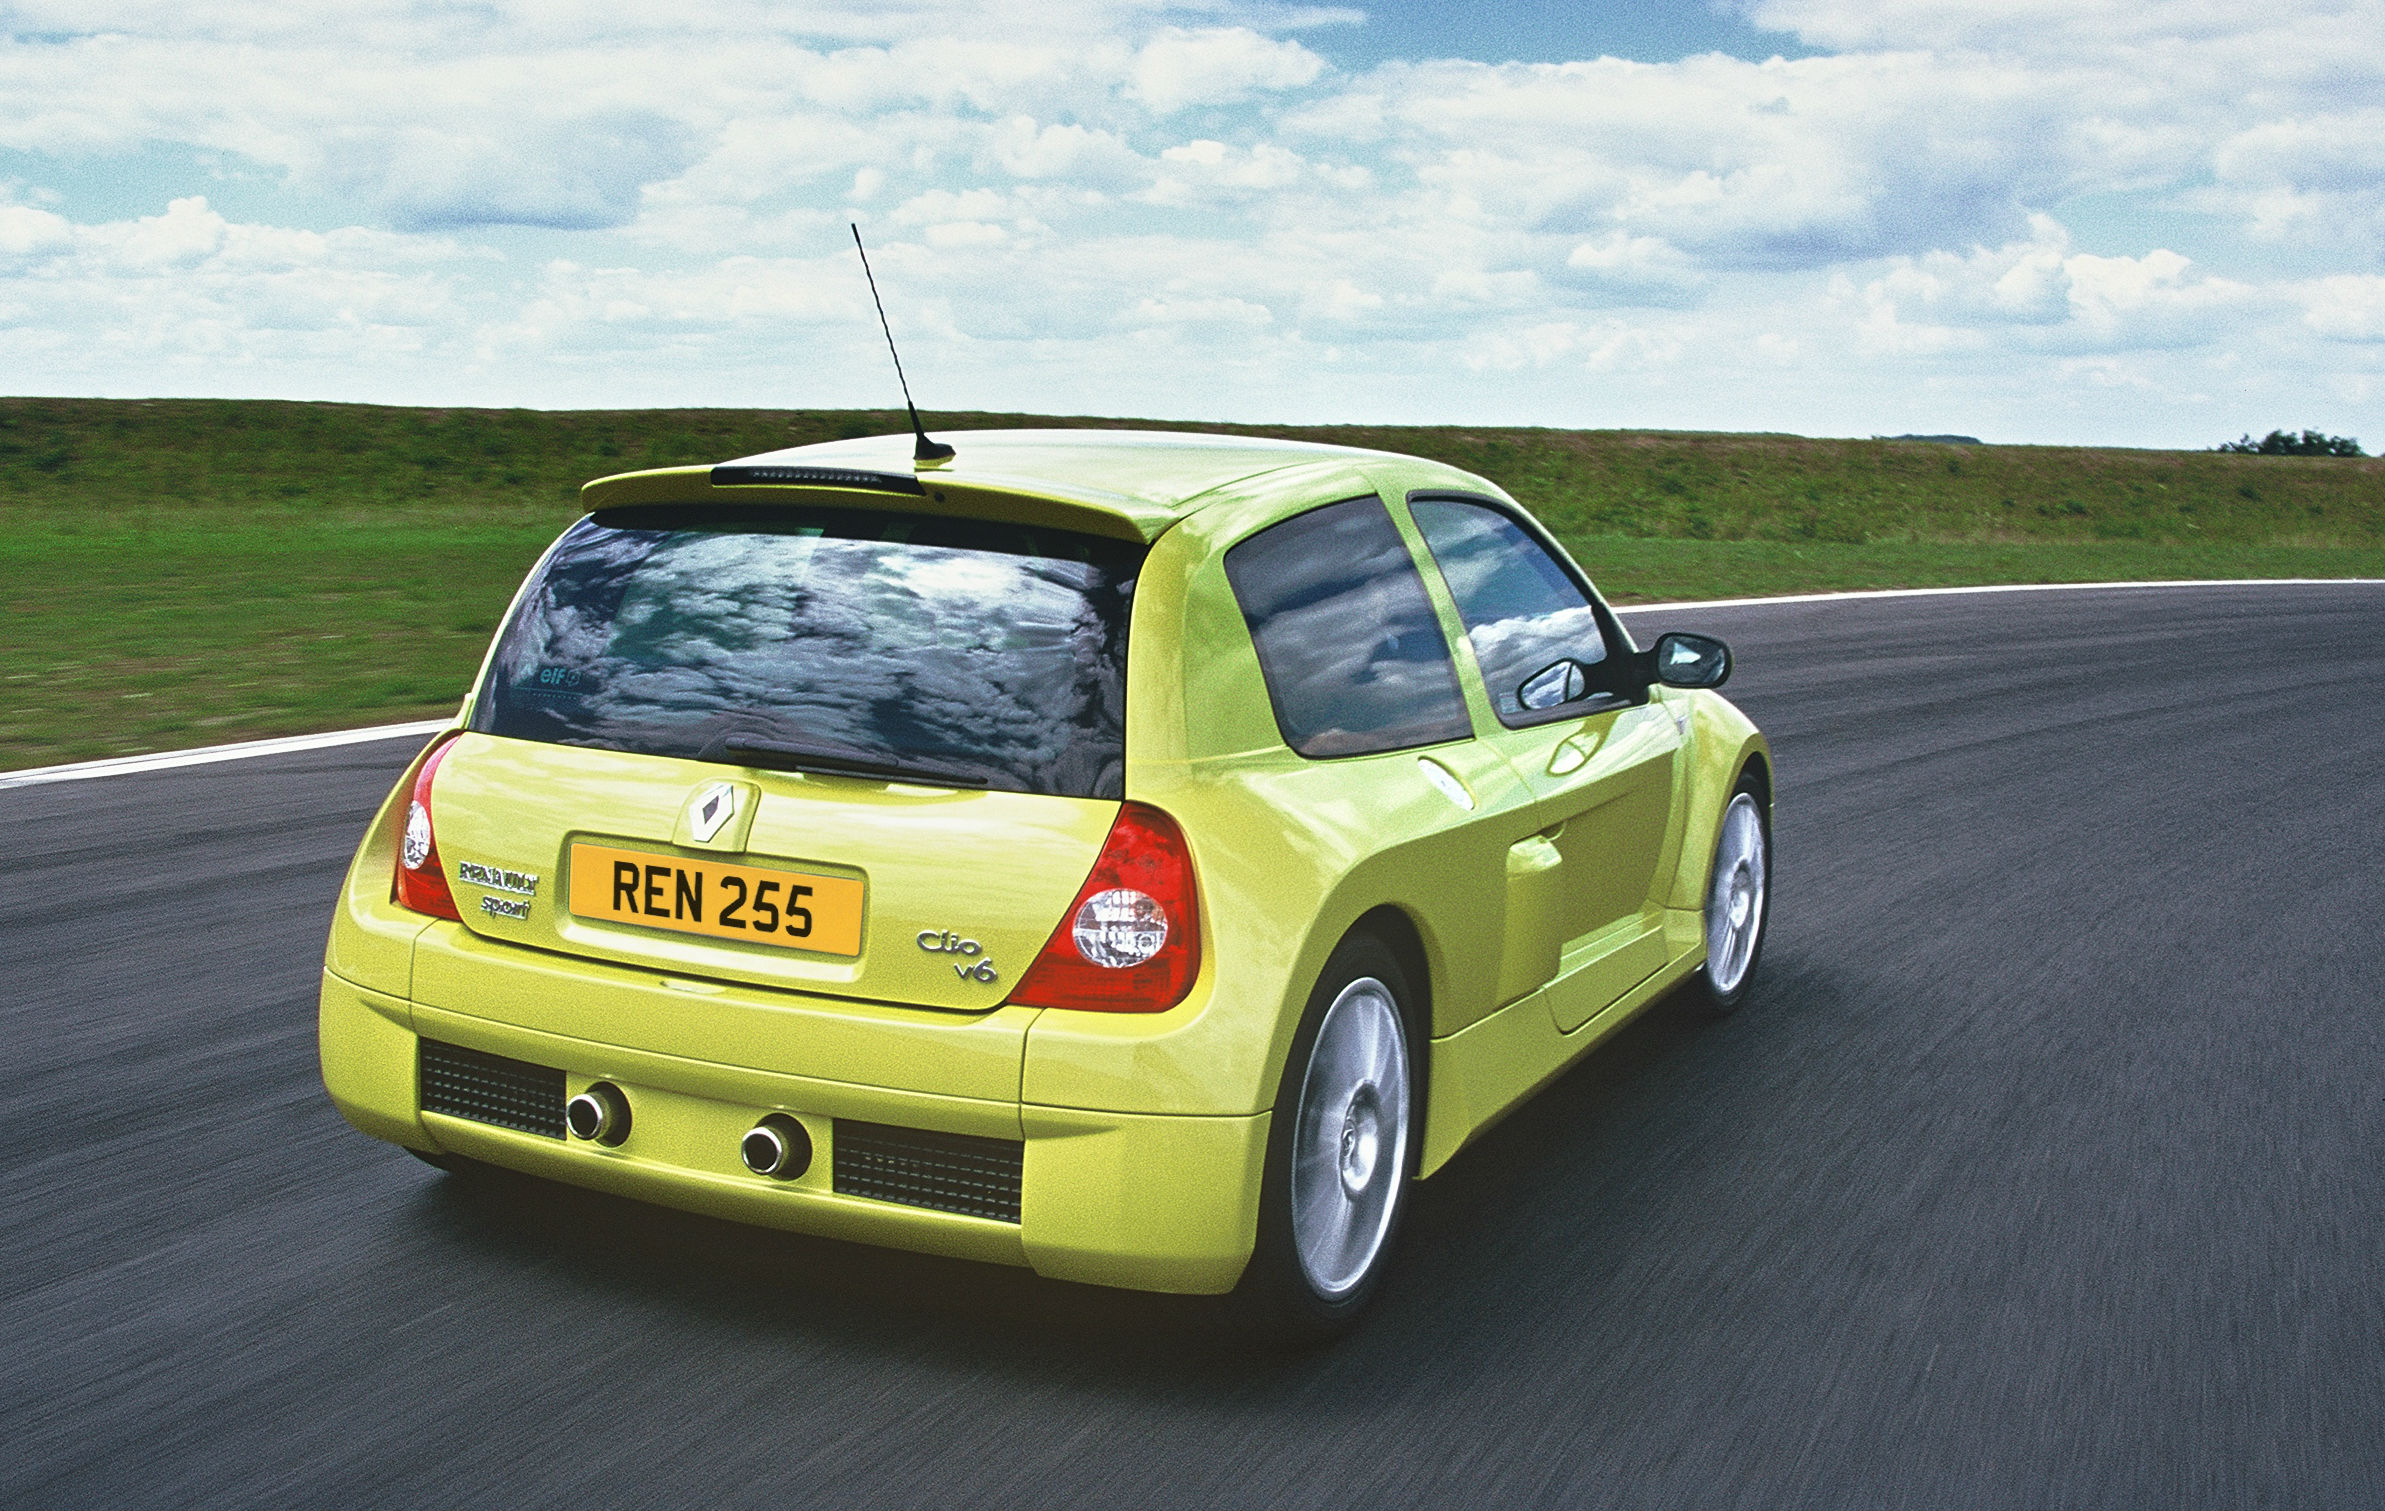 Buying guide to French sports cars includes the Renaultsport Clio V6